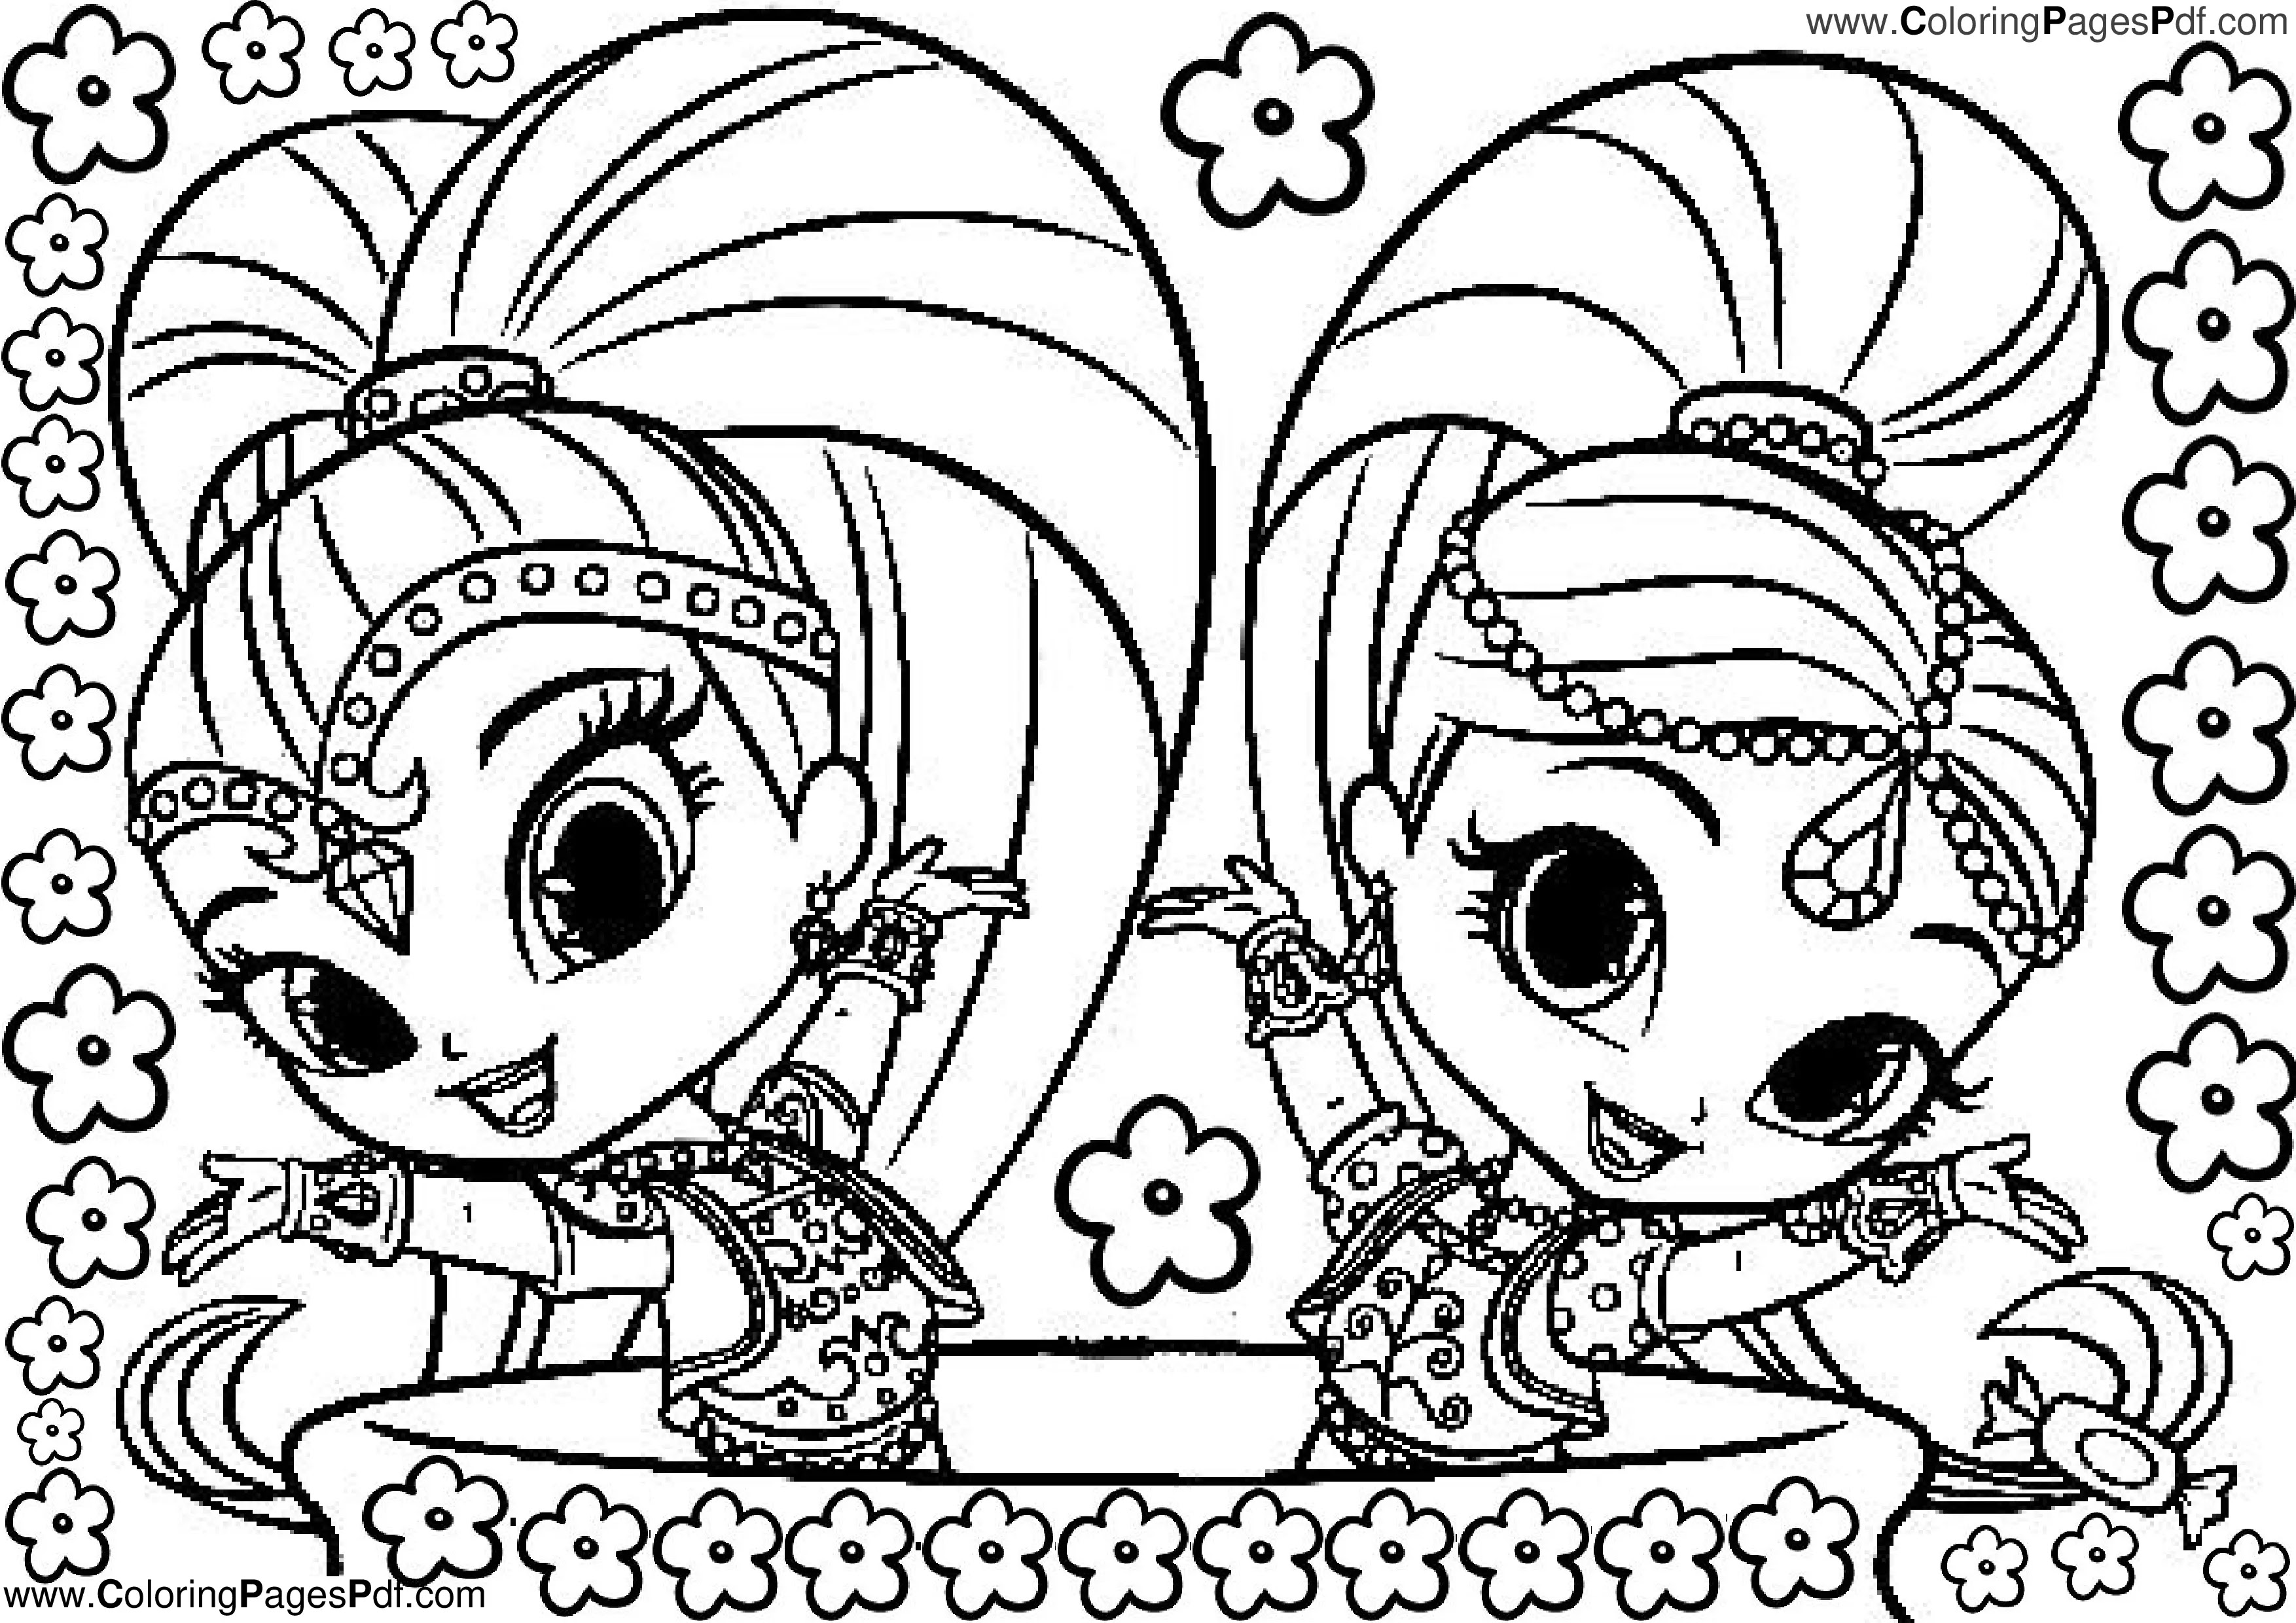 Shimmer and shine coloring pages online